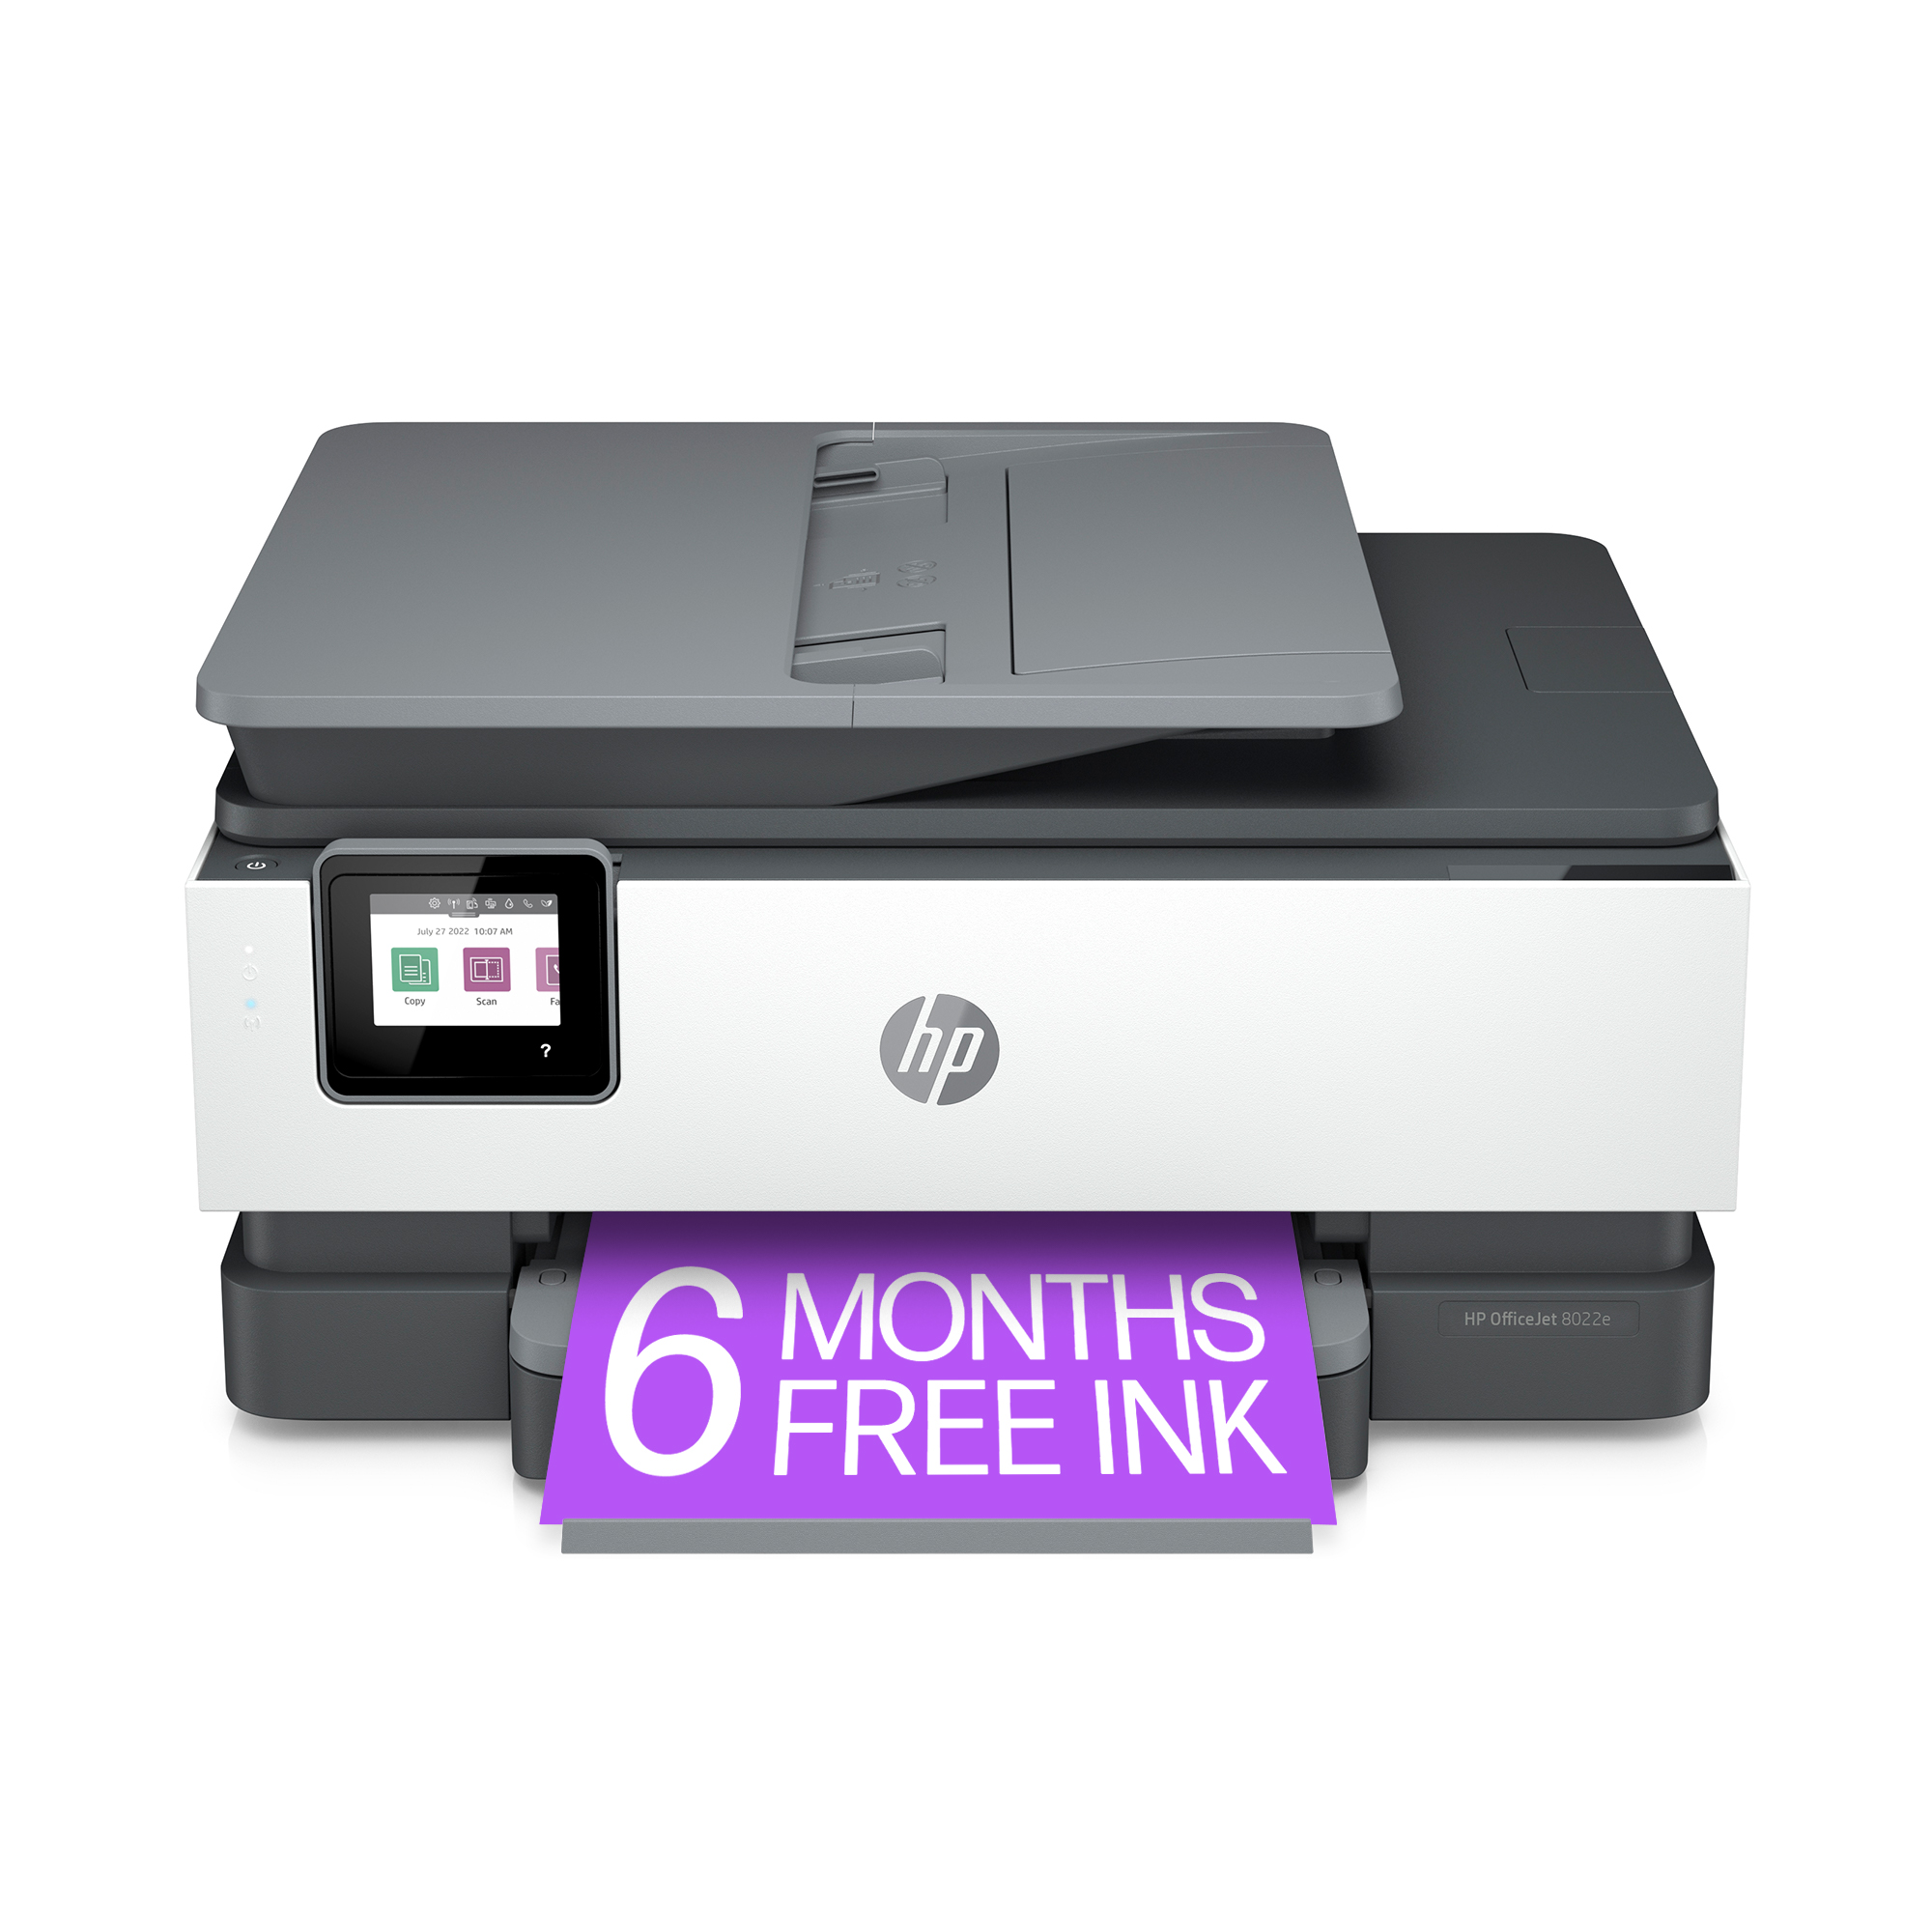 HP OfficeJet 8022e All-in-One Wireless Free with - Ink Months Inkjet HP+ 6 Instant Printer Color